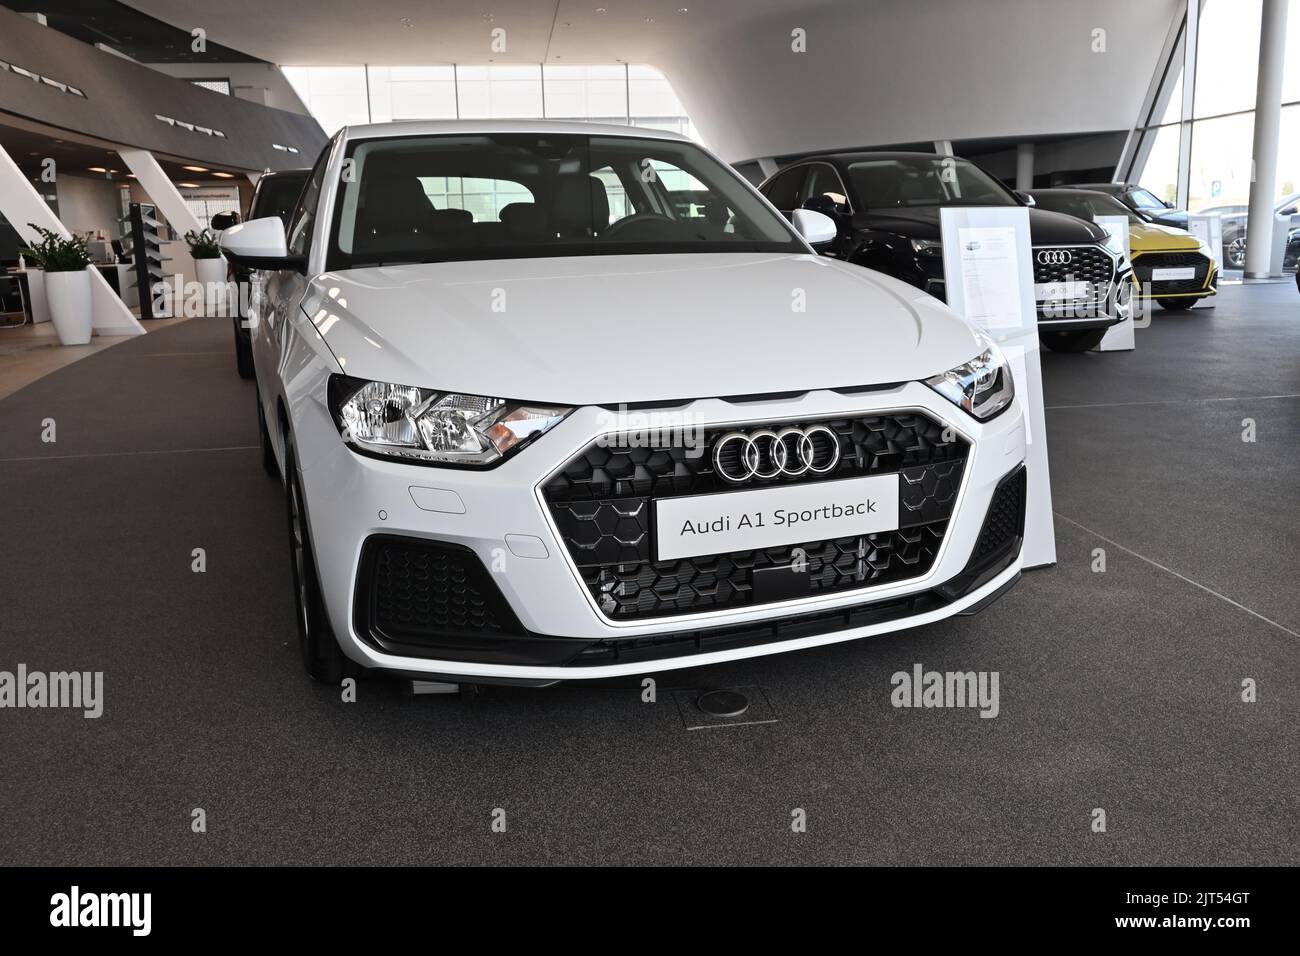 Gdansk, Poland - August 27, 2022: New model of Audi A1 Sportback presented in the car showroom of Gdansk Stock Photo